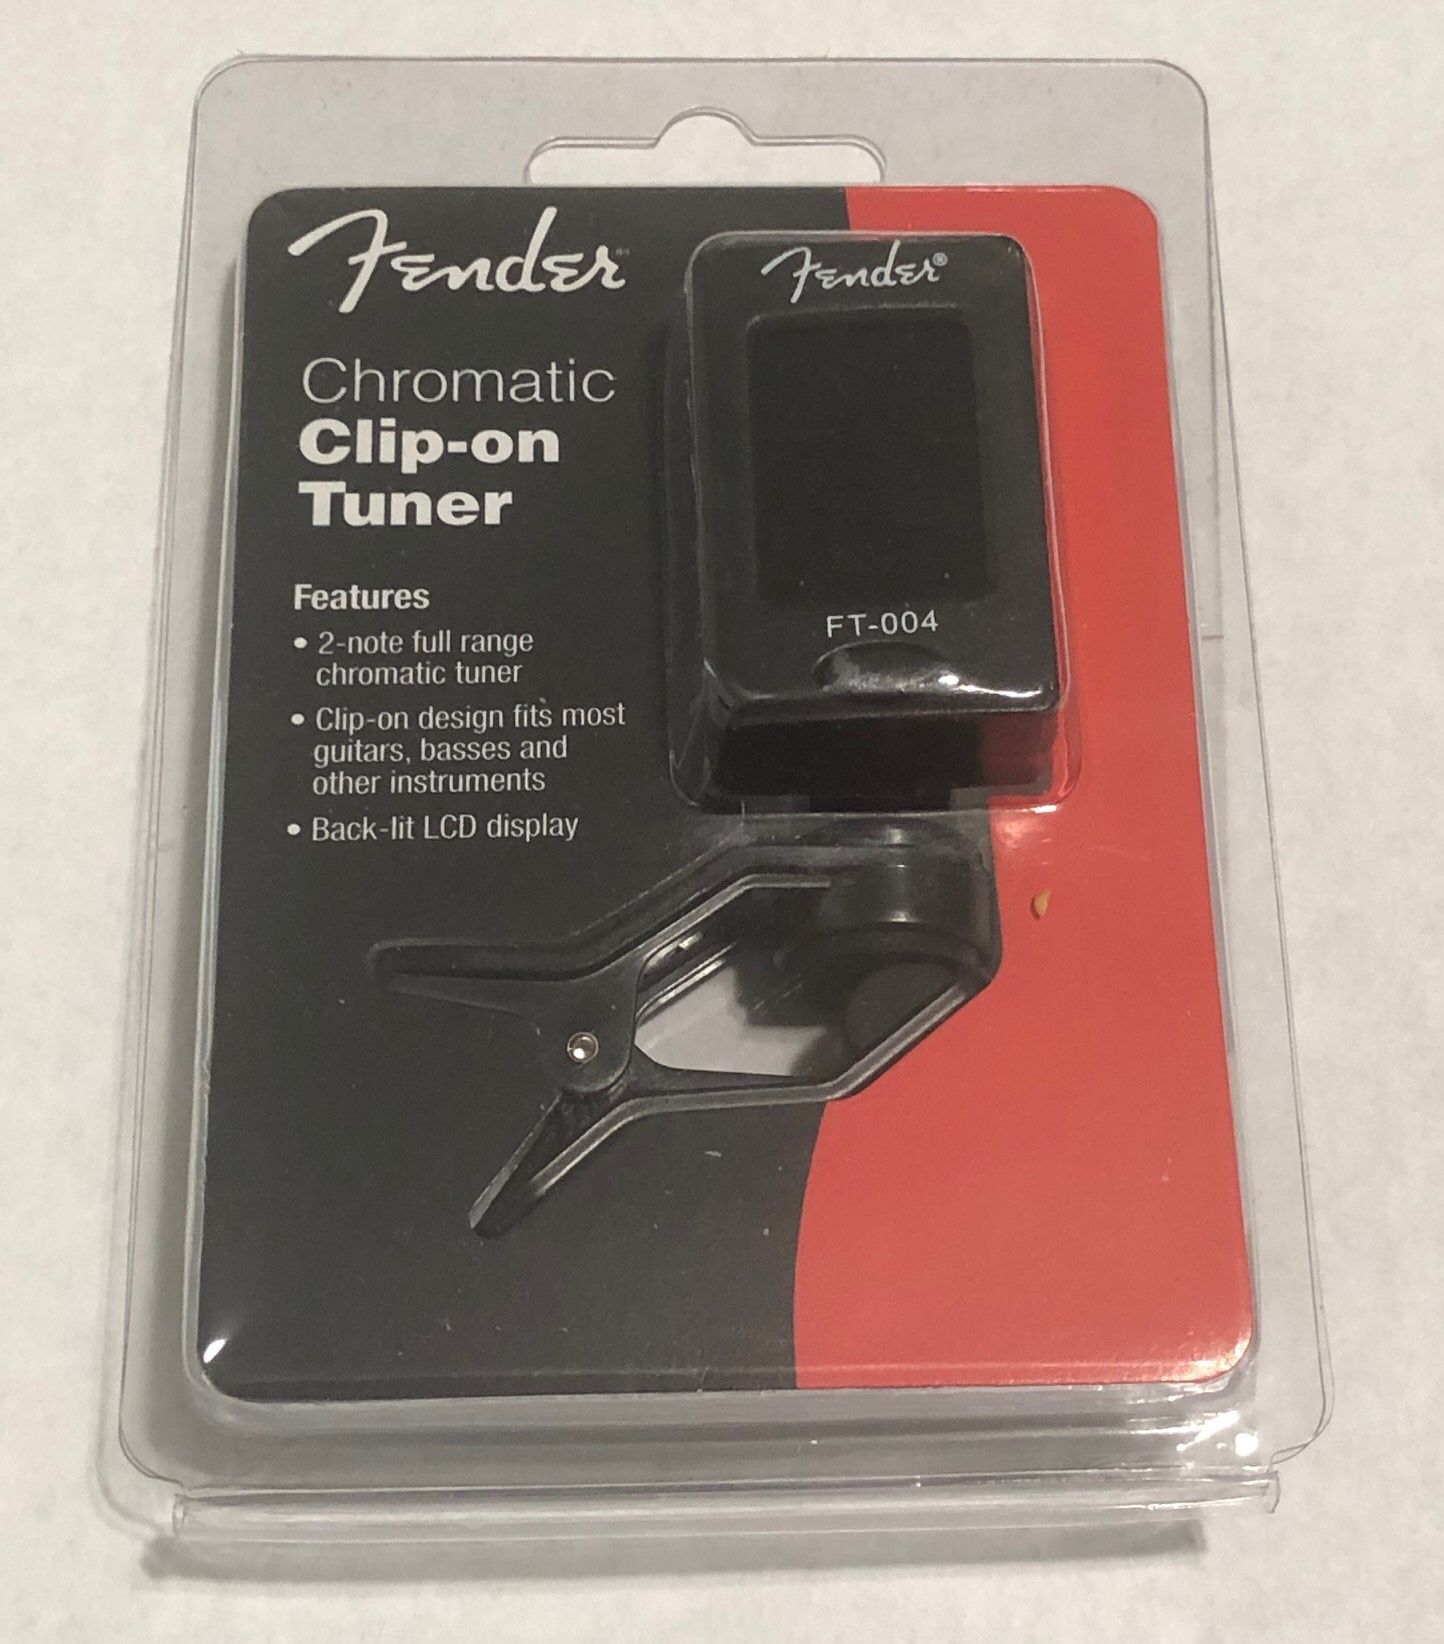 FENDER CHROMATIC CLIP ON TUNER FT-004 GUITAR TUNER. BRAND NEW FACTORY SEALED, fender, Squier, bass, acoustic, electric, amp, effects